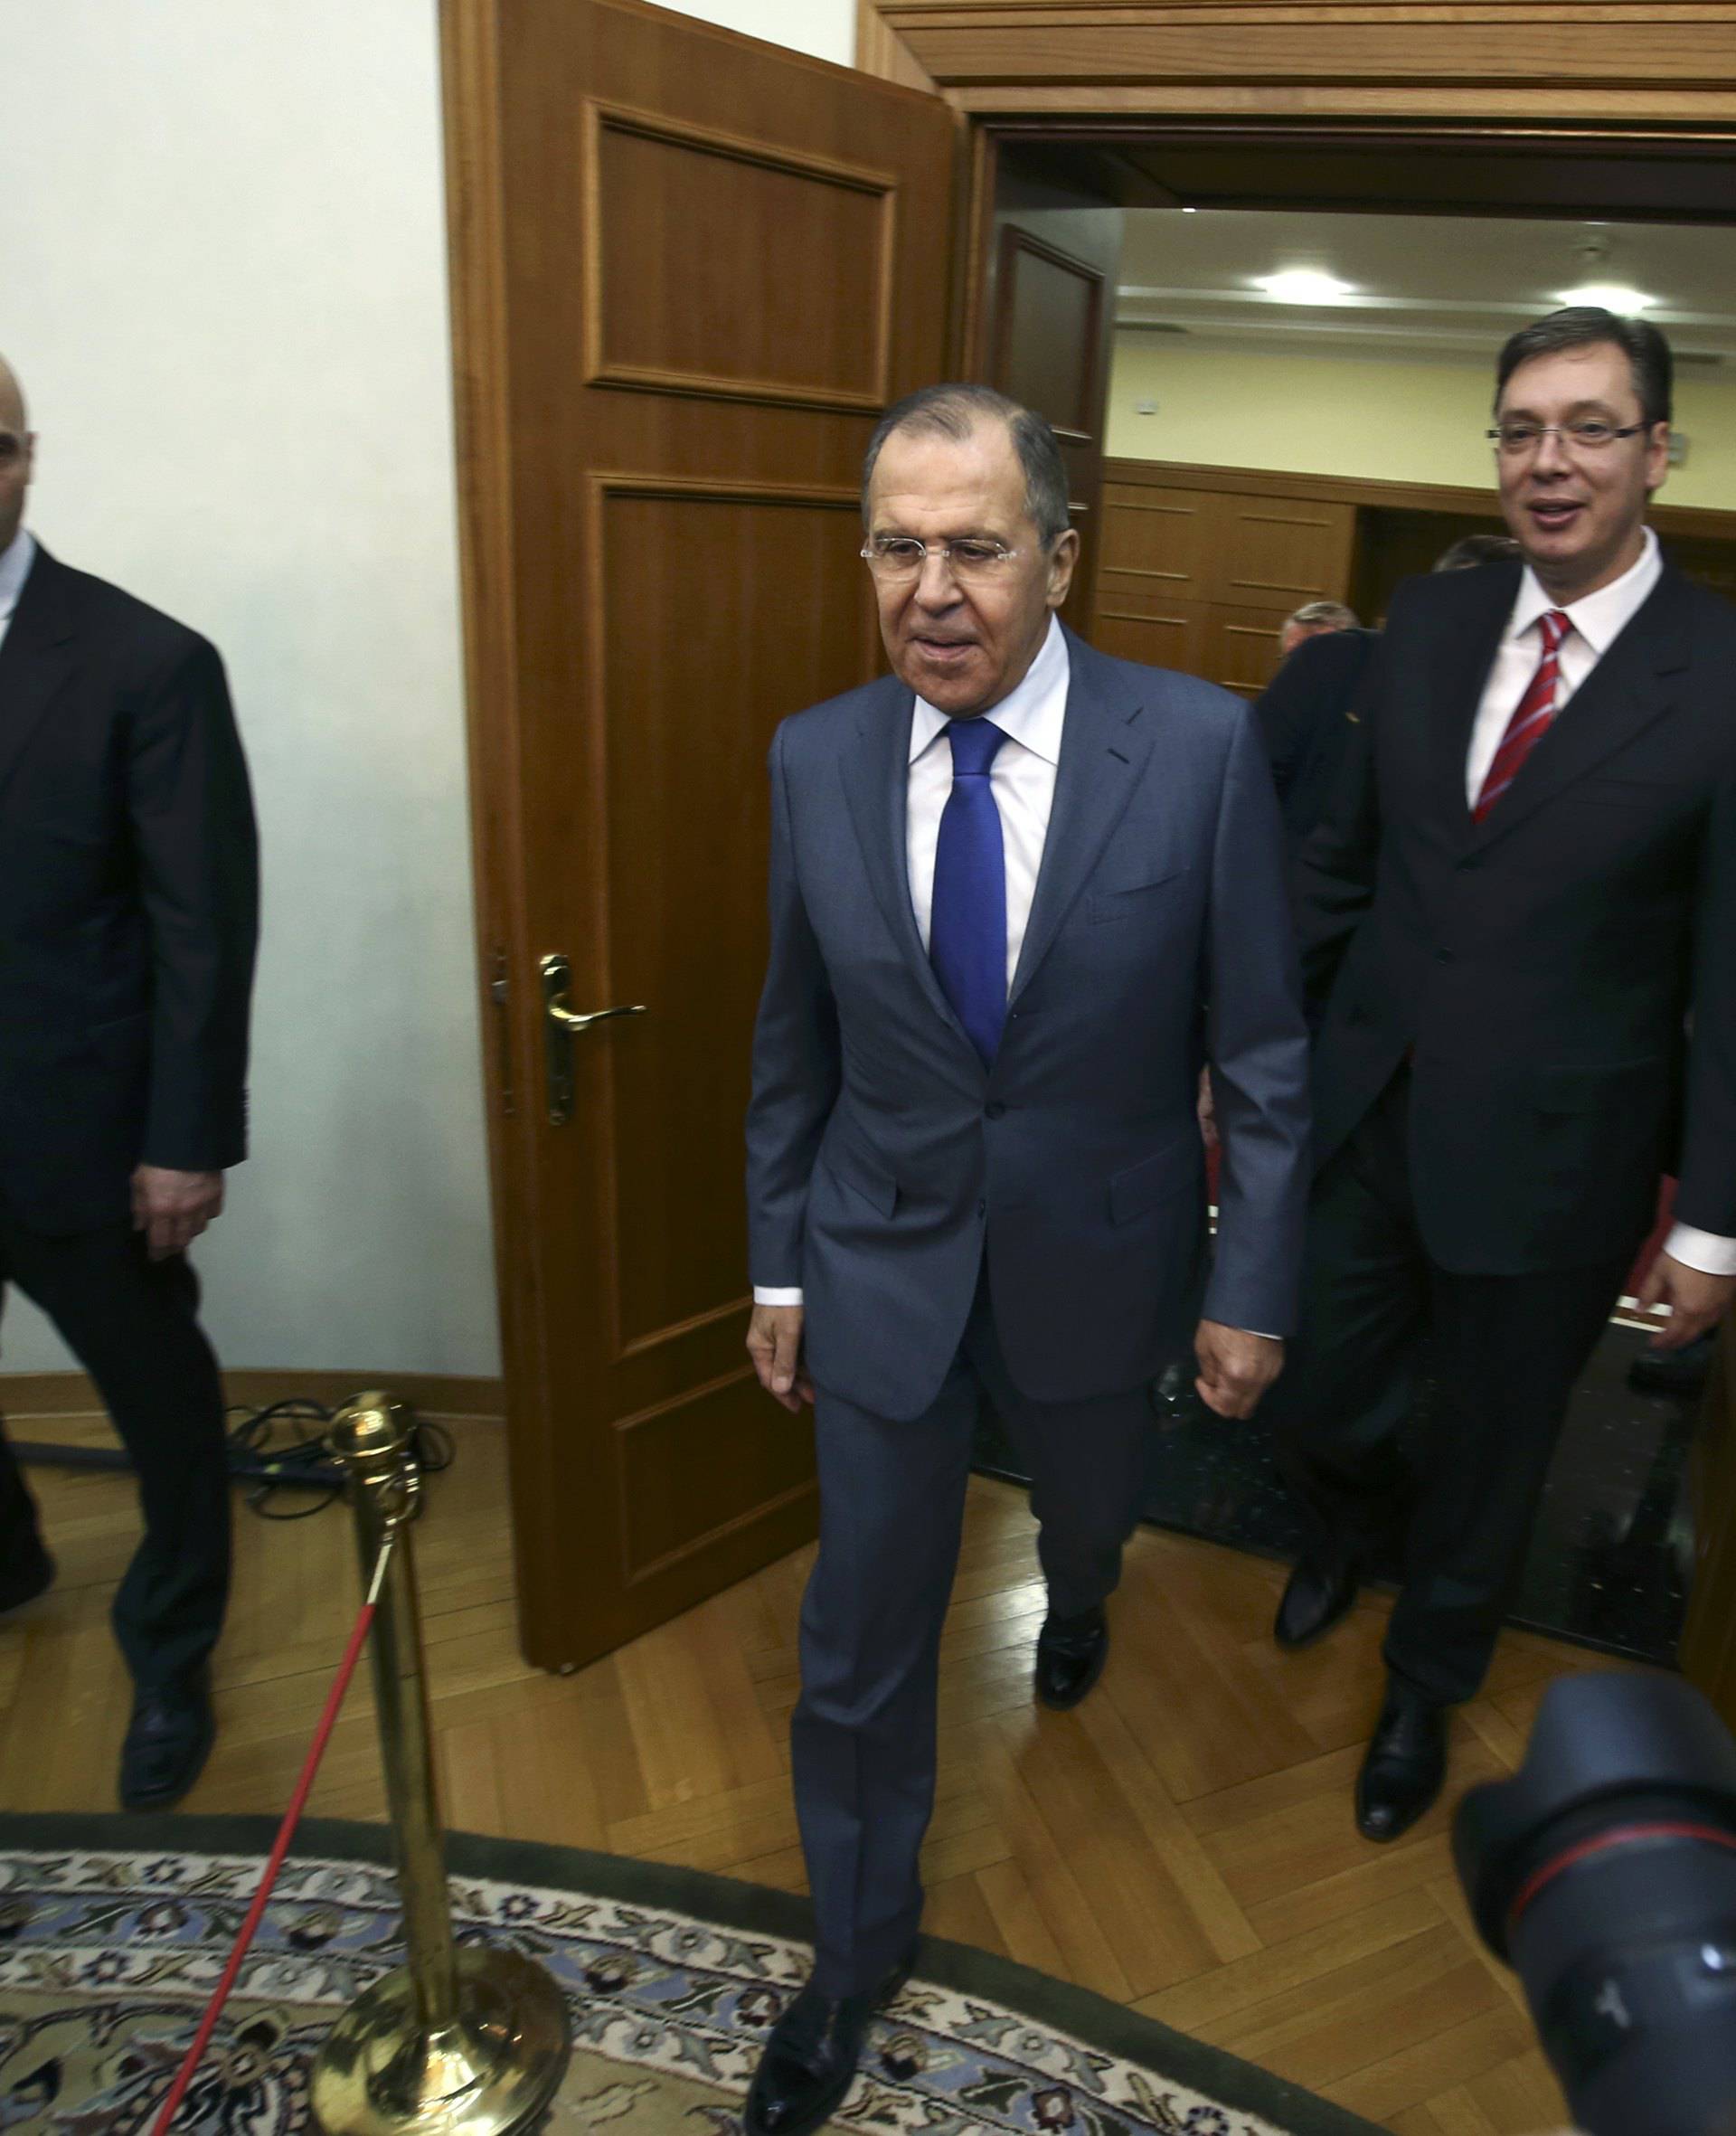 Russia's Foreign Minister Lavrov and Serbia's PM Vucic arrive for their meeting in Belgrade